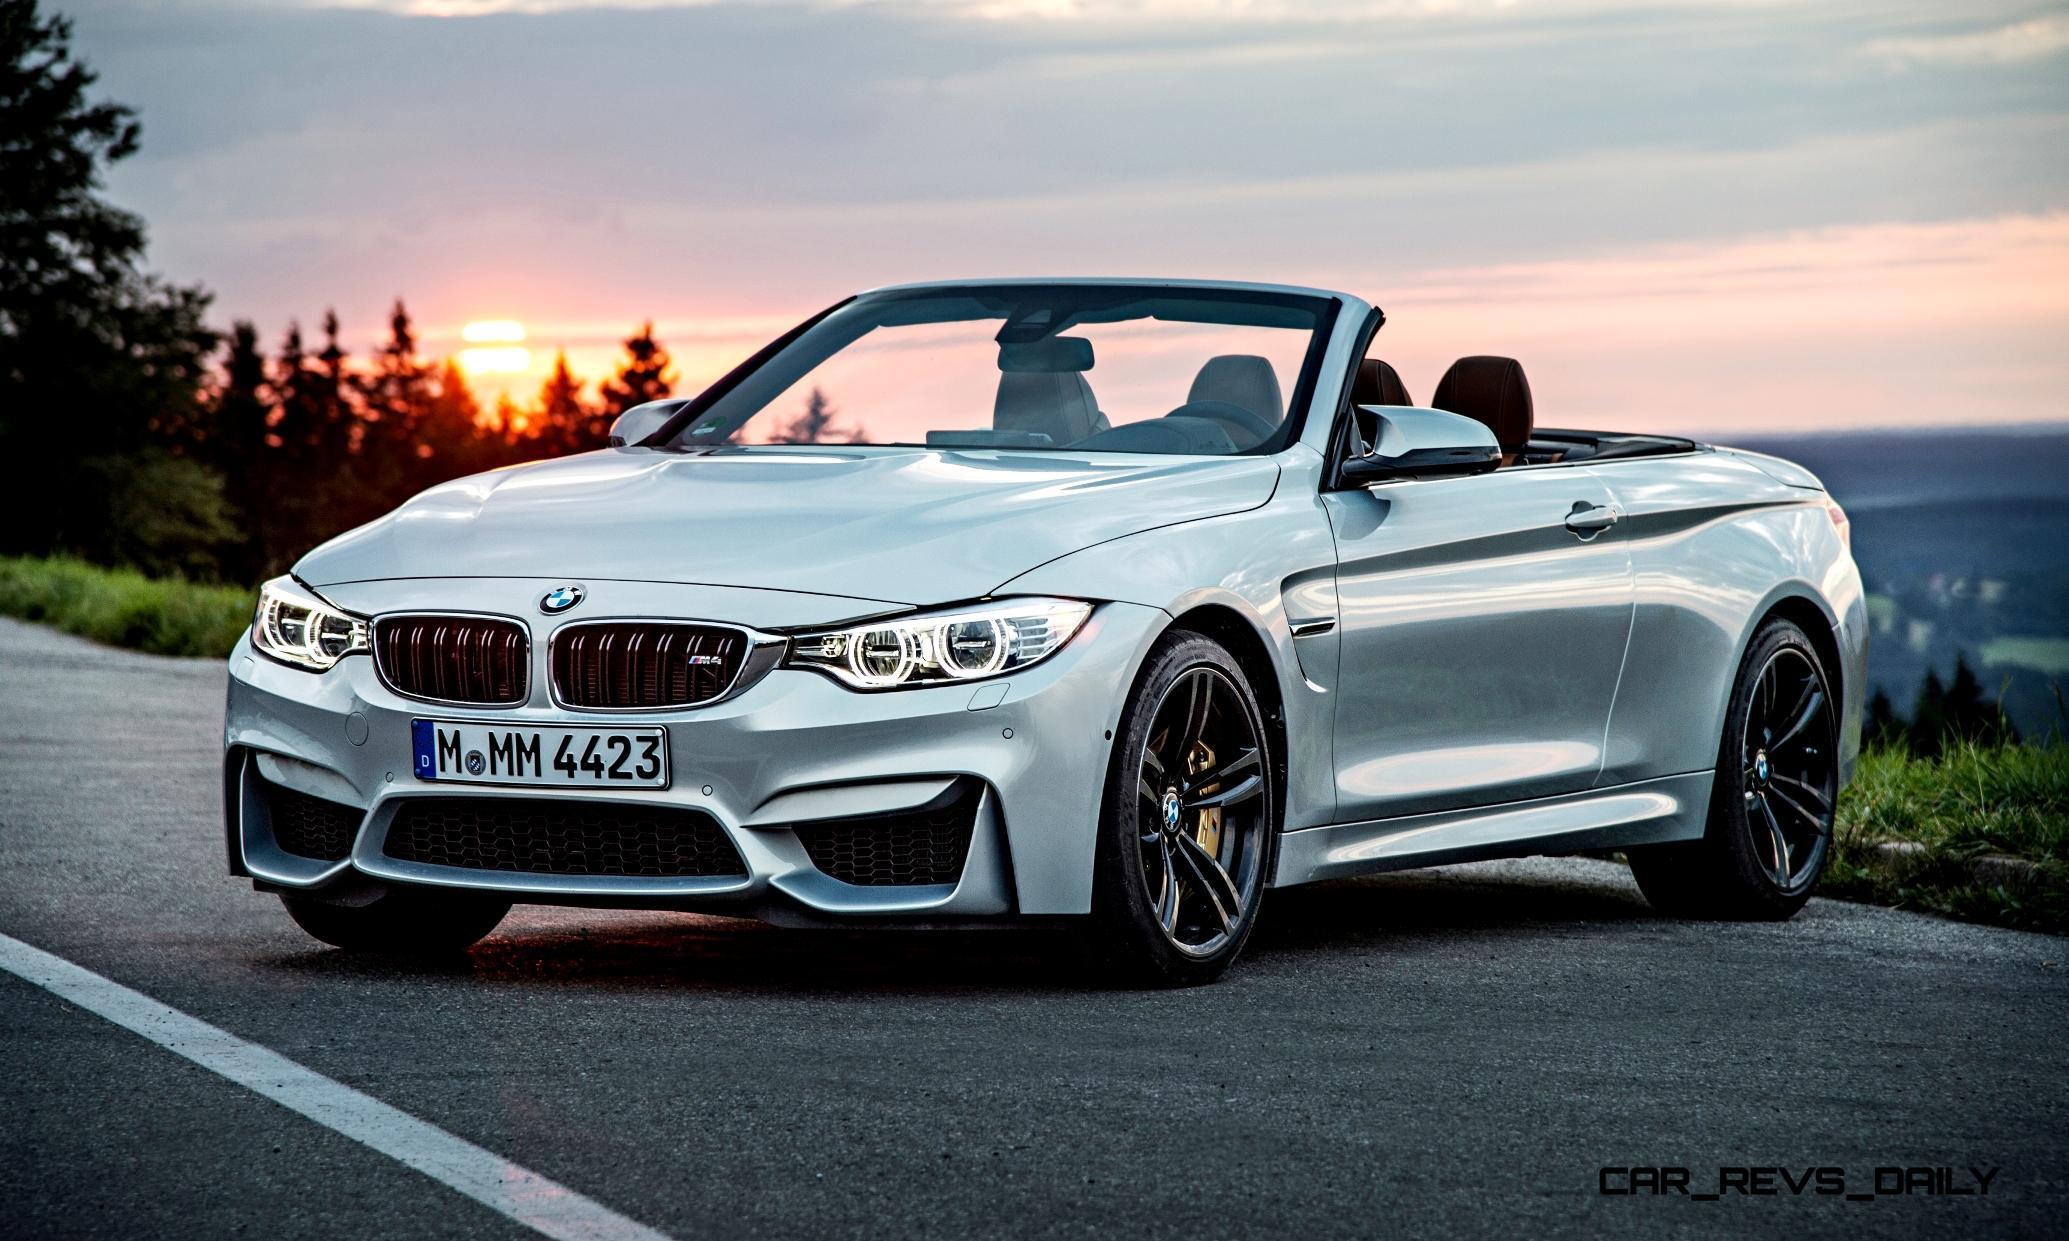 Used 2015 BMW M4 Convertible For Sale (Special Pricing) BJ Motors Stock FP968405